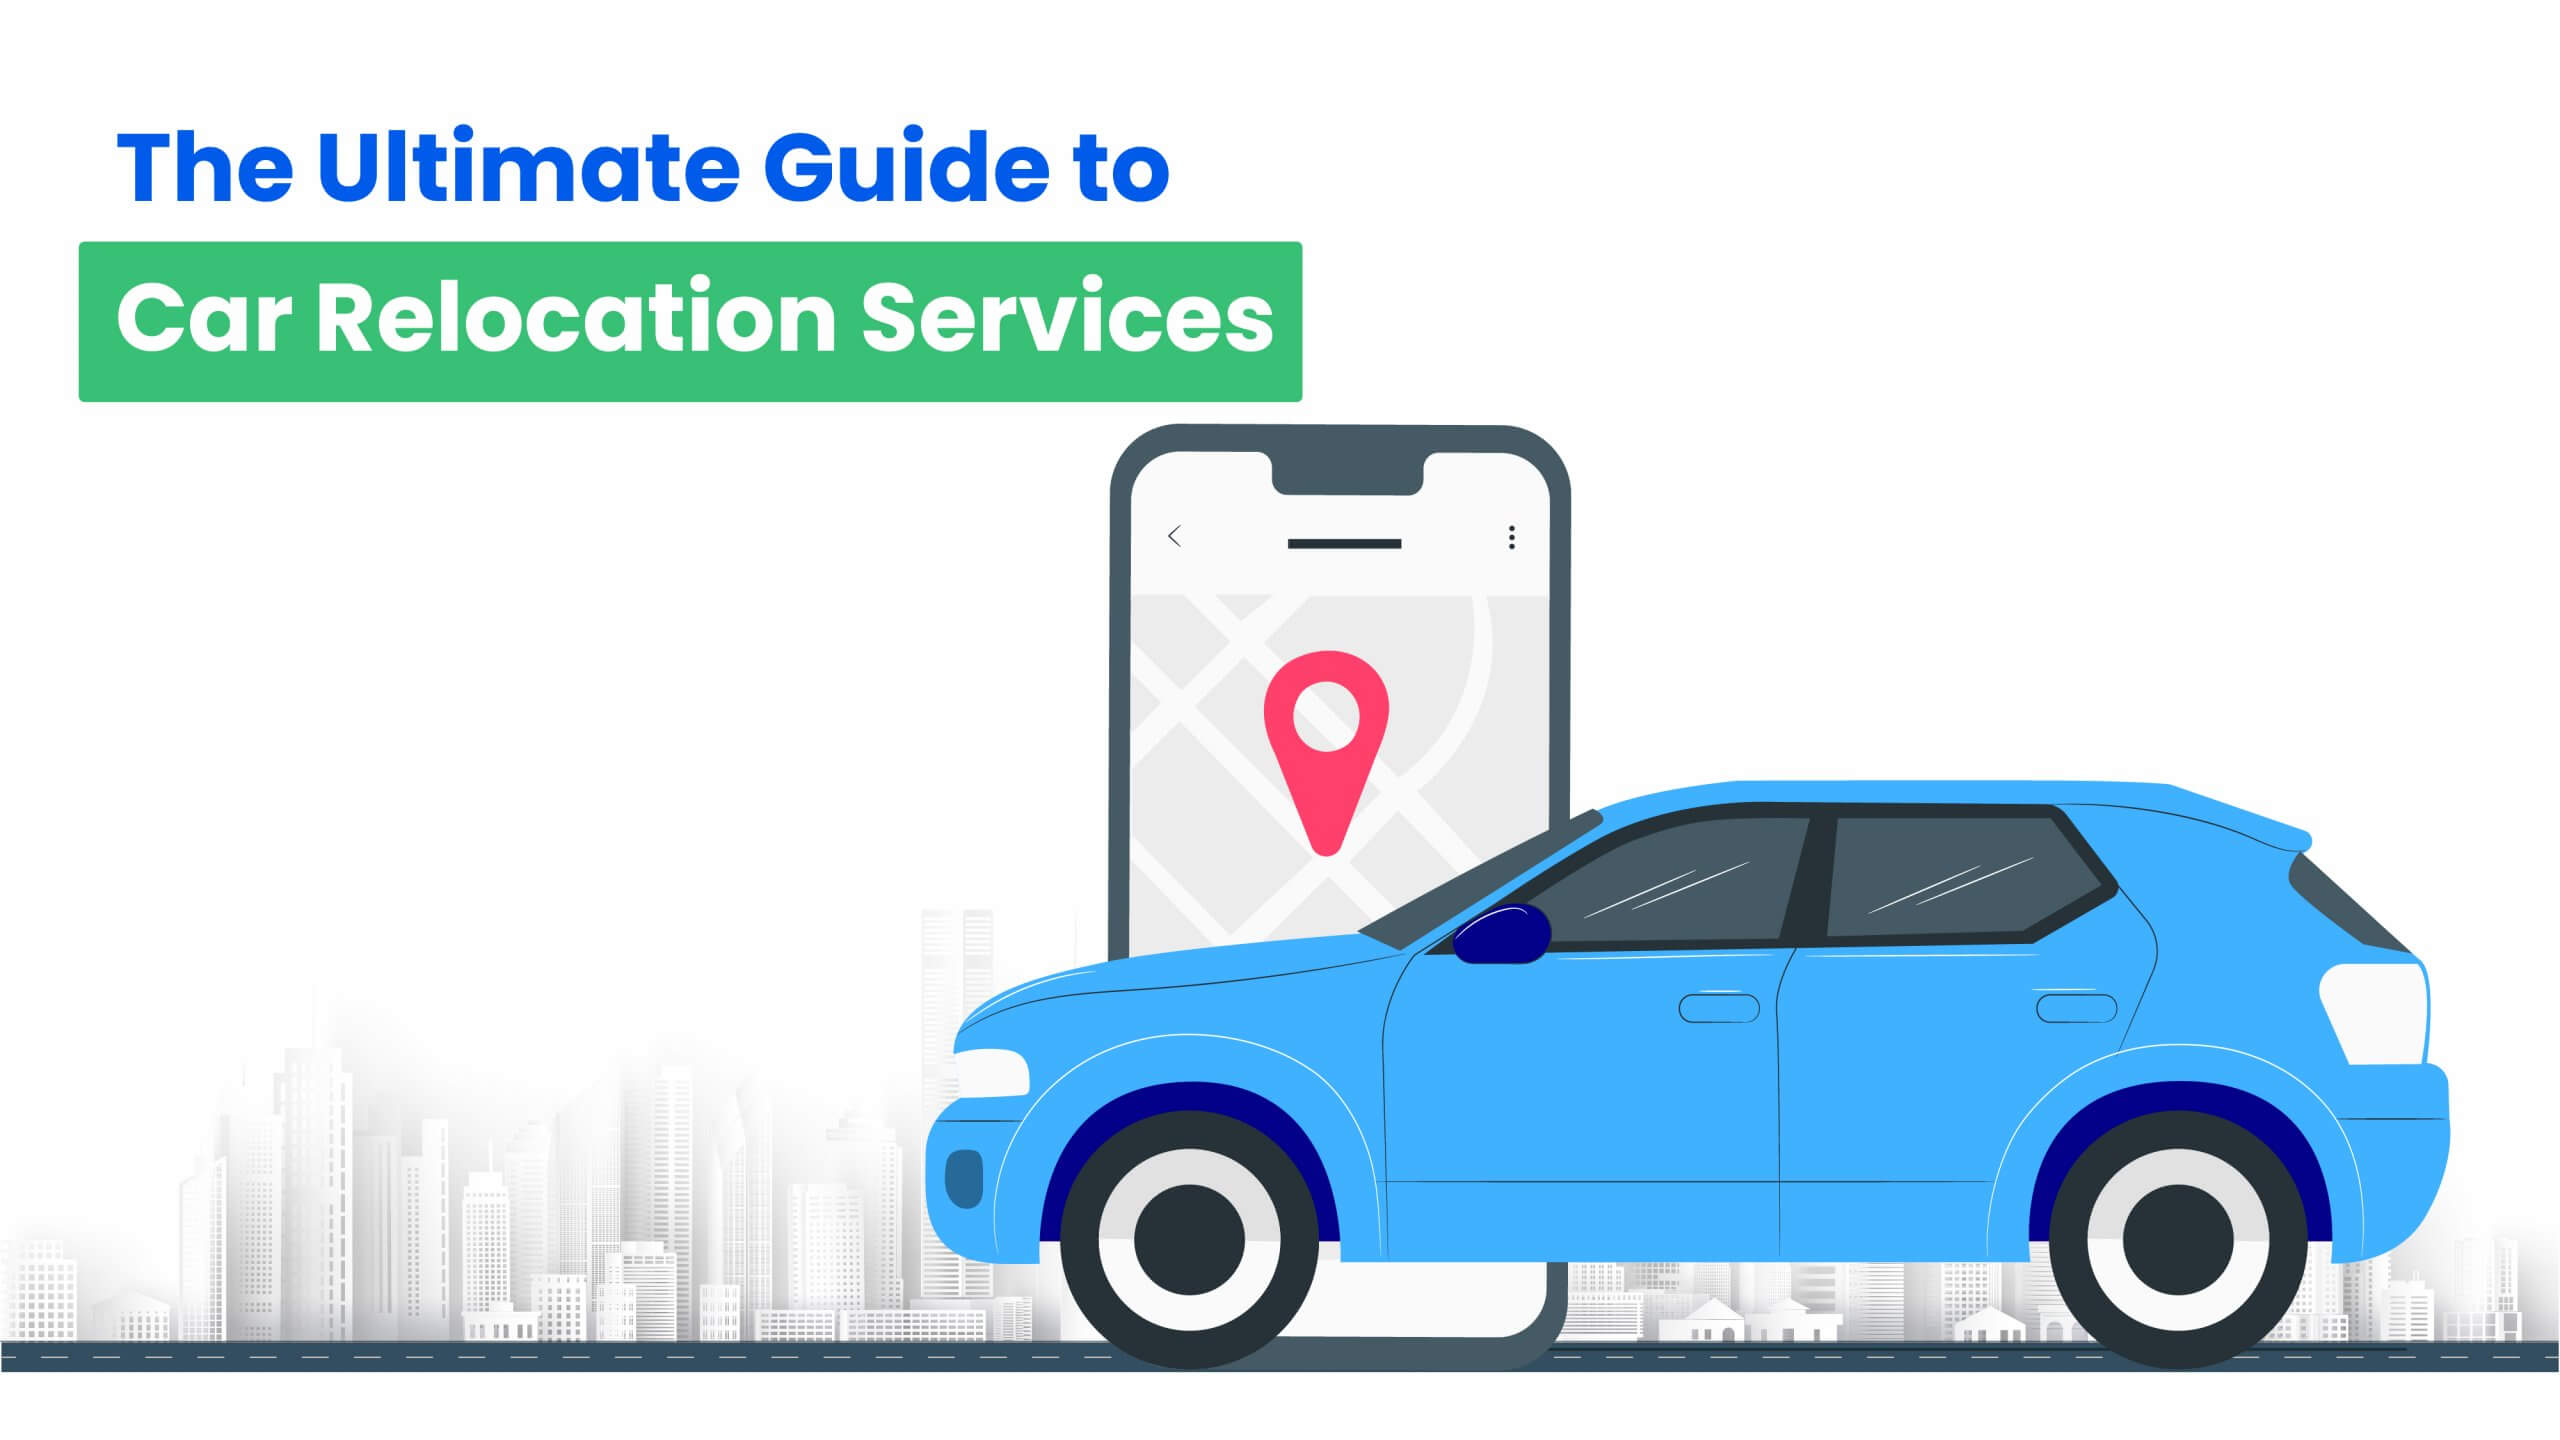 The Ultimate Guide to Car Relocation Services